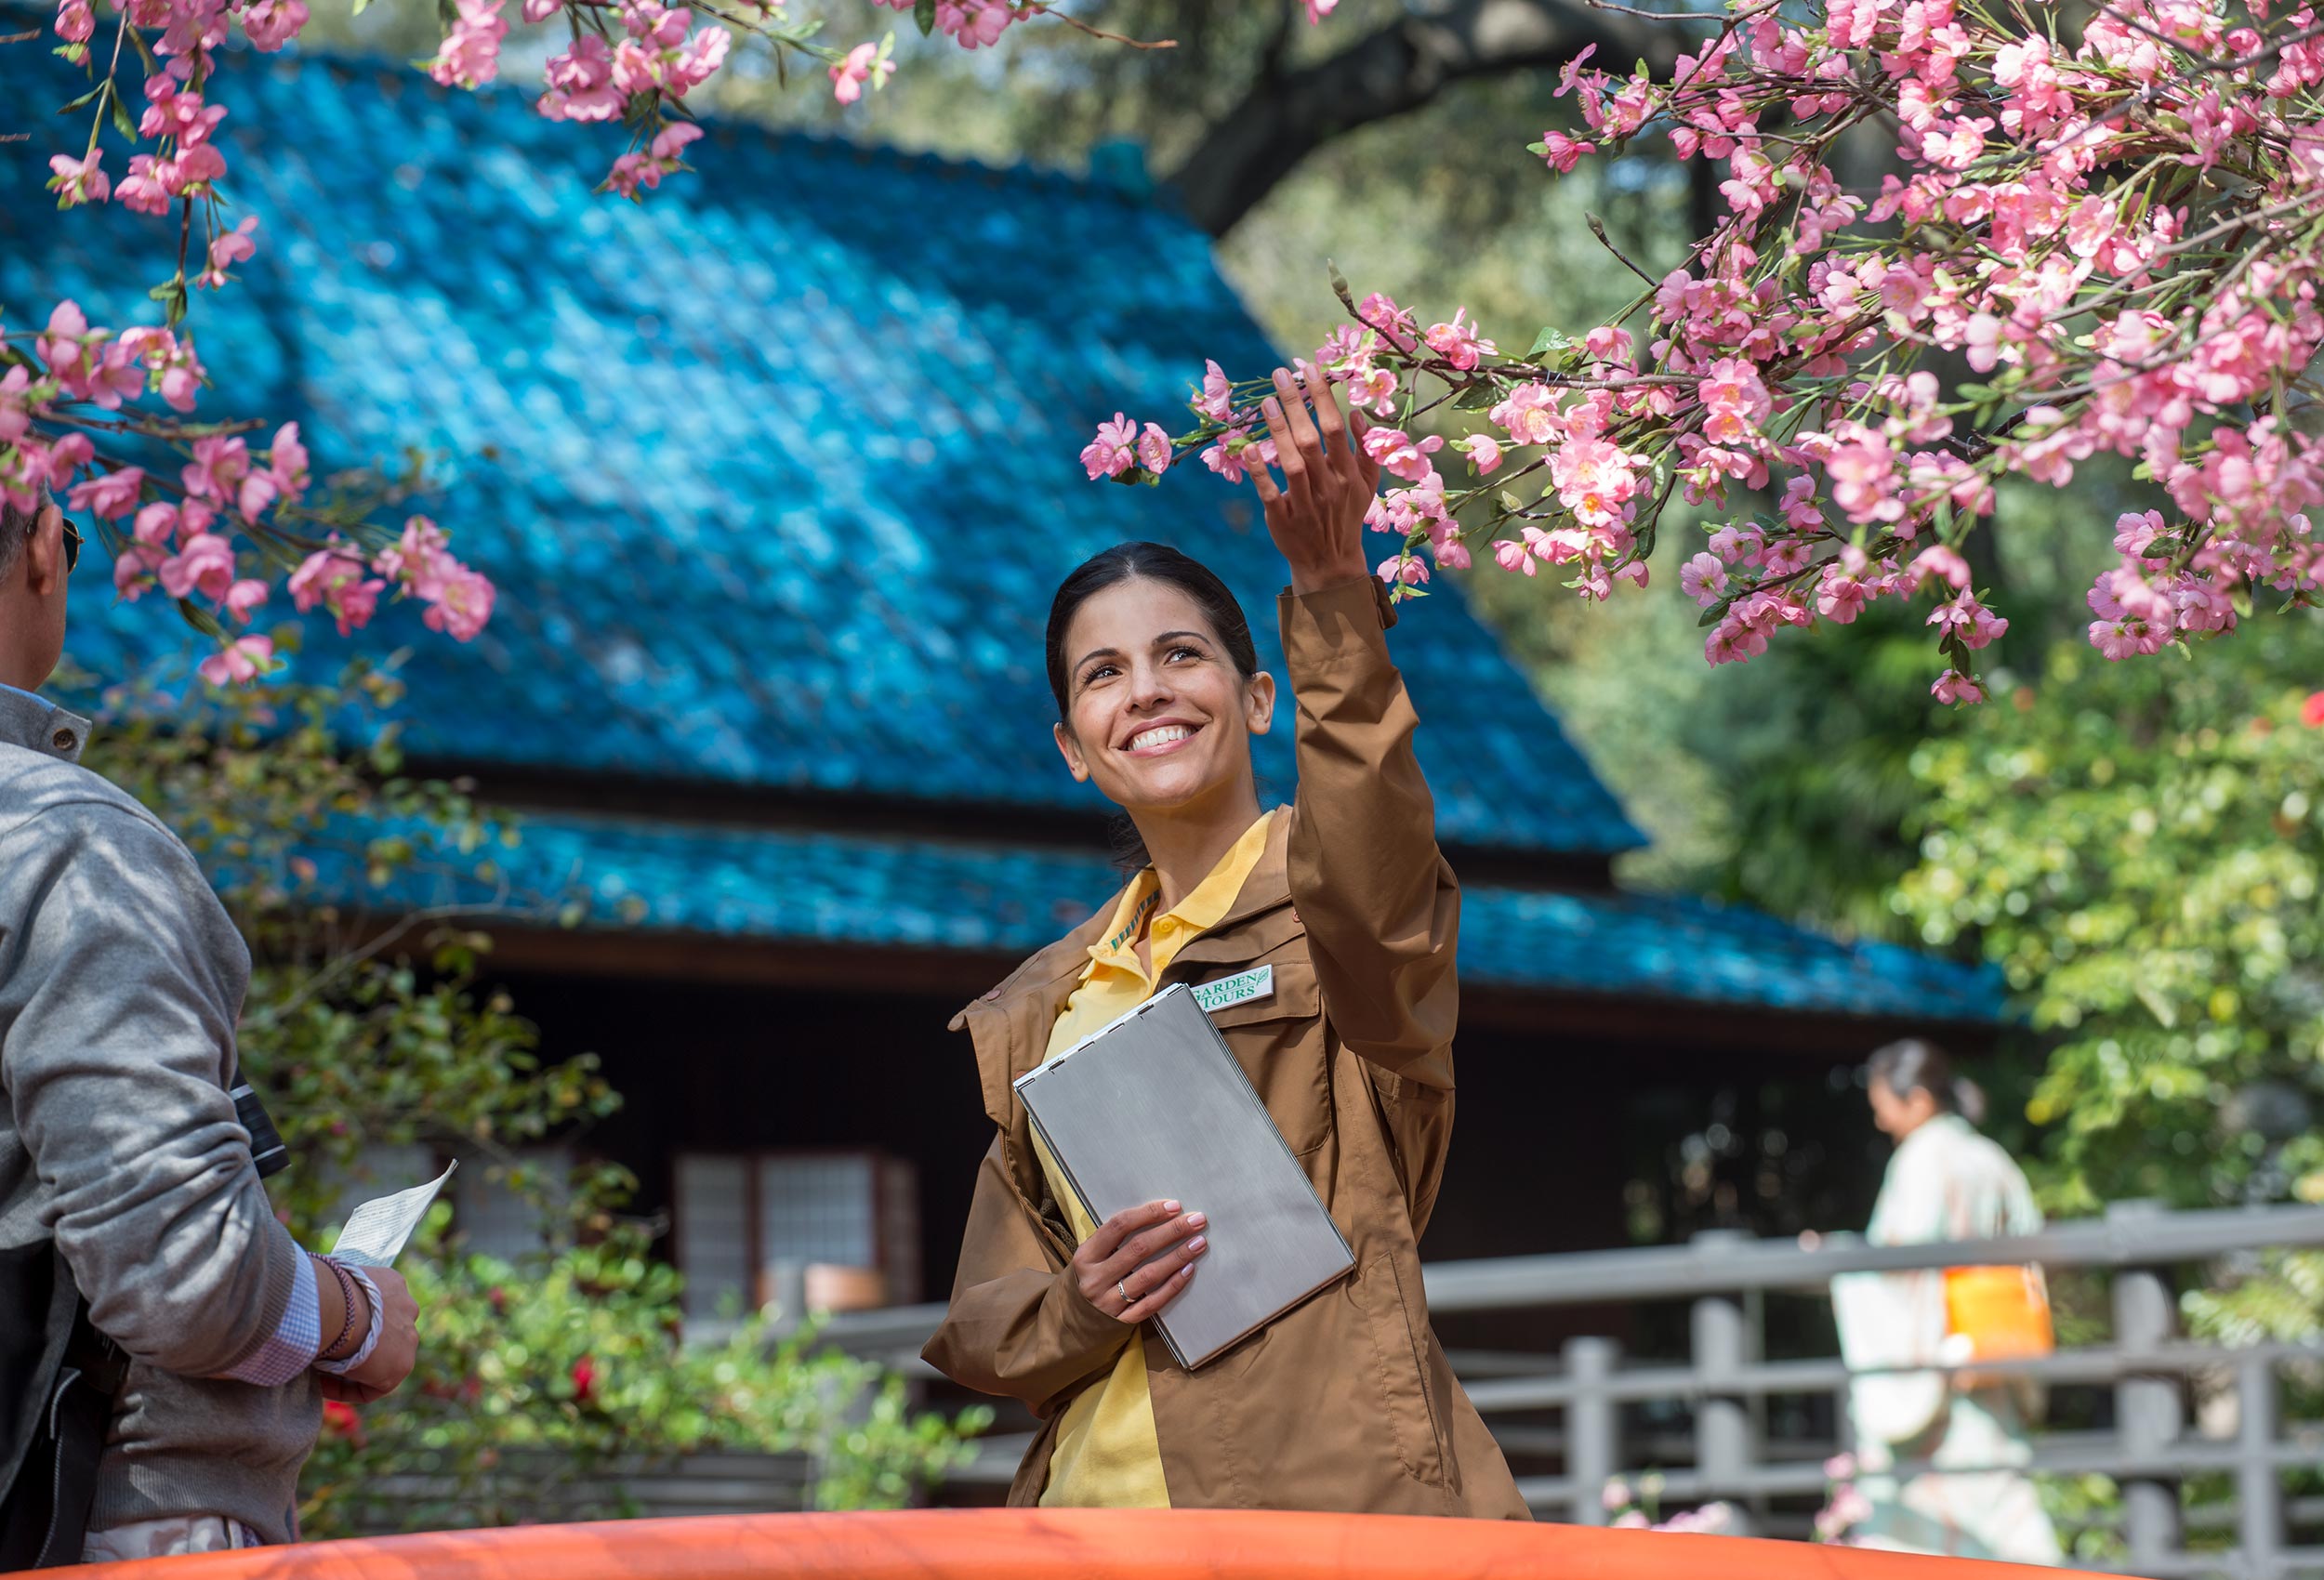 Tour guide smells  apple blossoms in Chinese garden for lifestyle advertising campaign for Claritin D